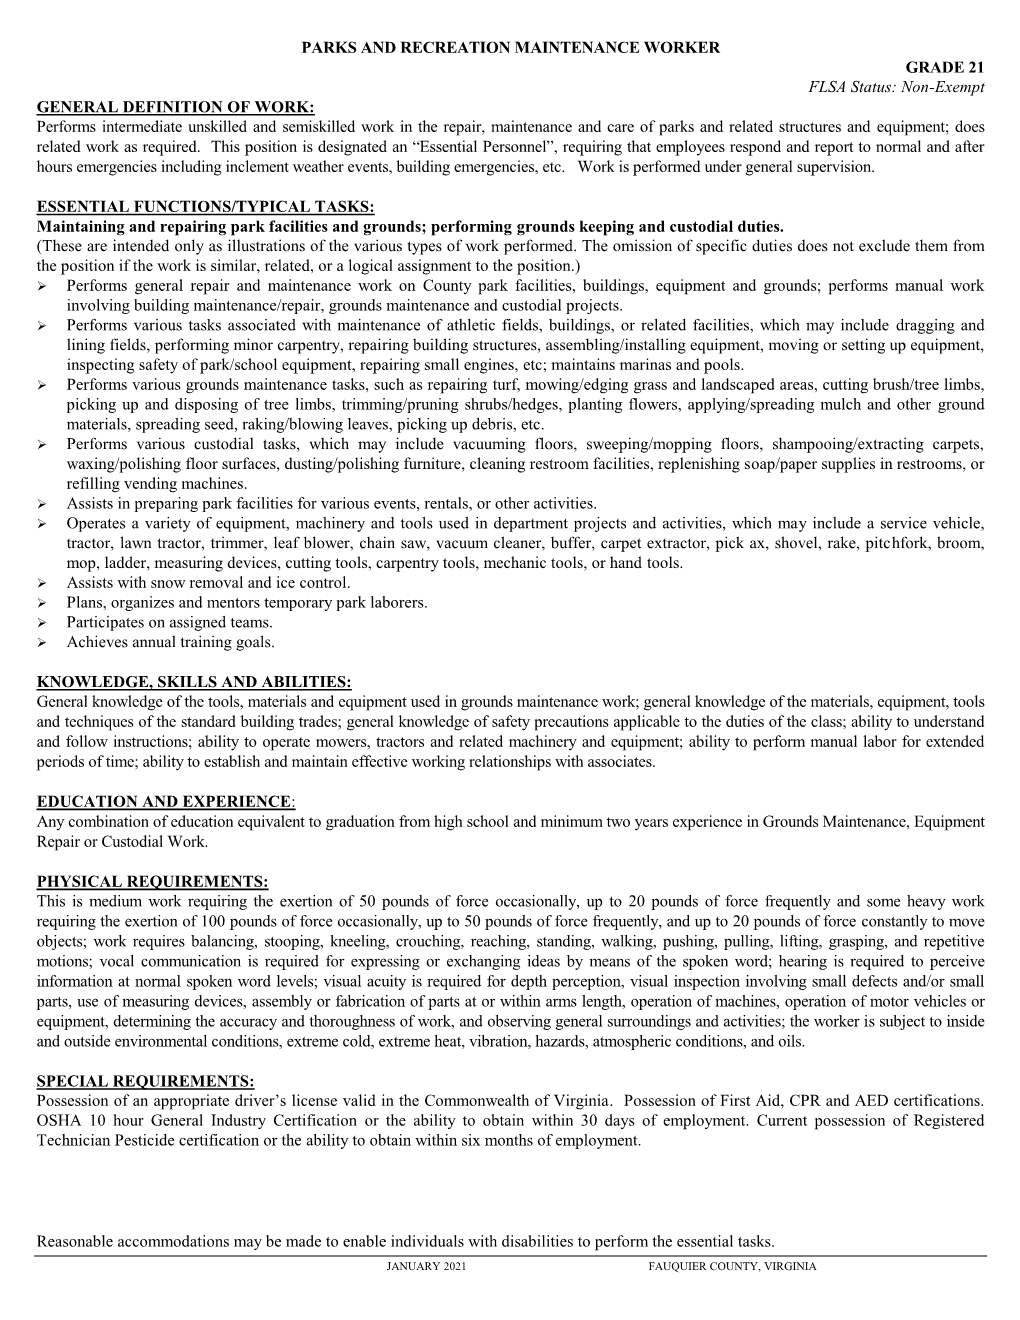 Parks and Facilities Maintenance Worker I